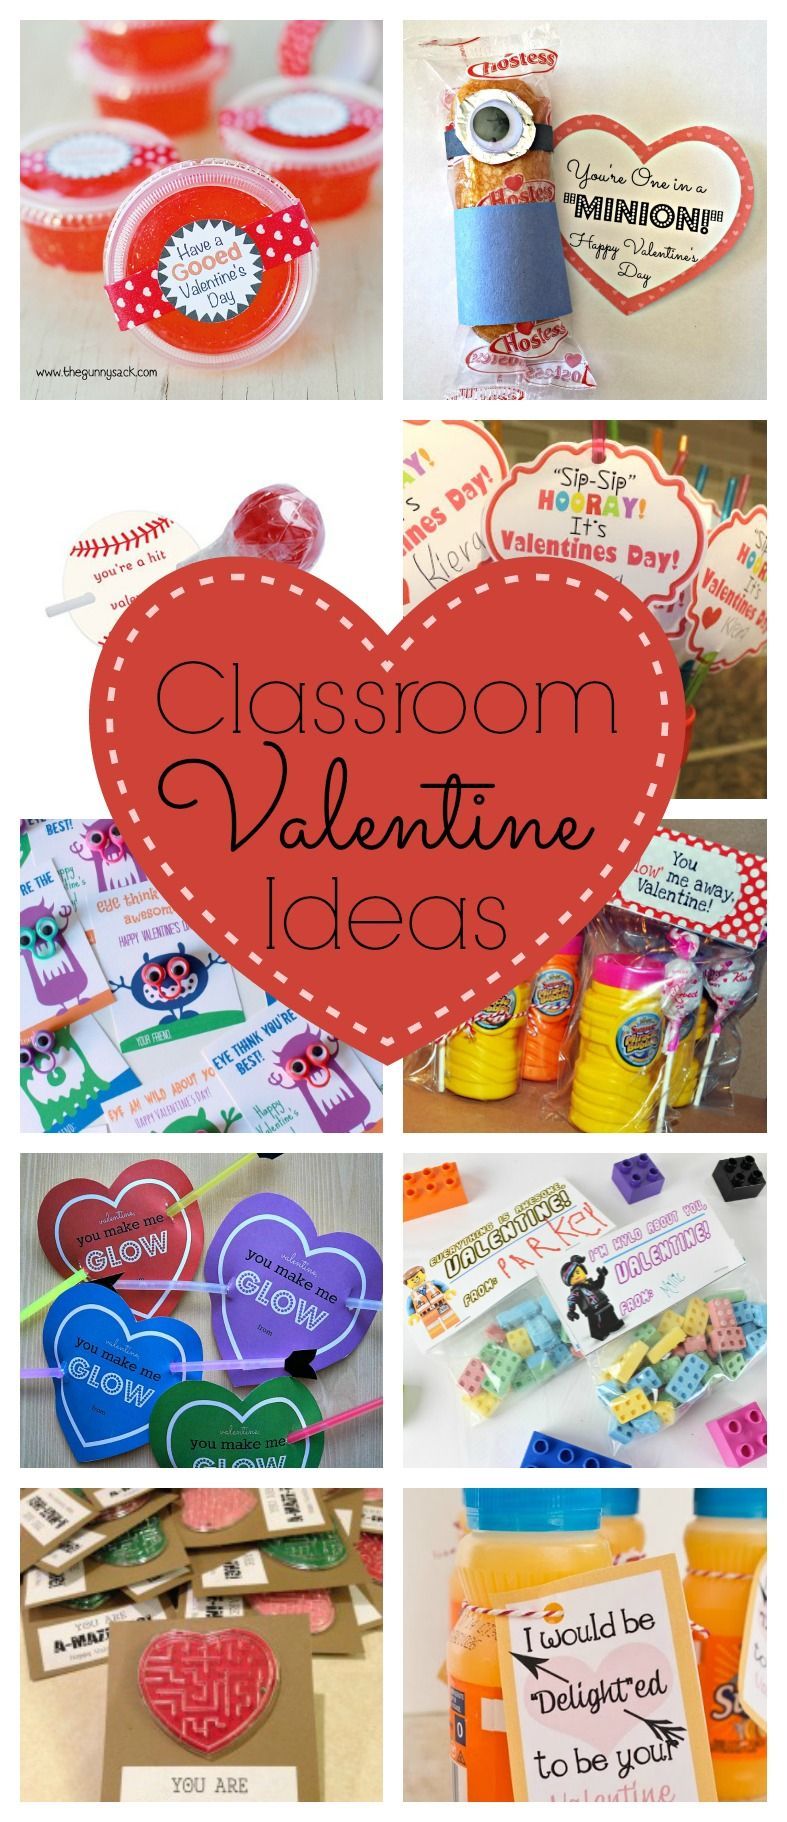 Classroom Valentine Ideas…Every year I am on the look out for fun and creative Classroom Valentine Ideas. Here are a few of my